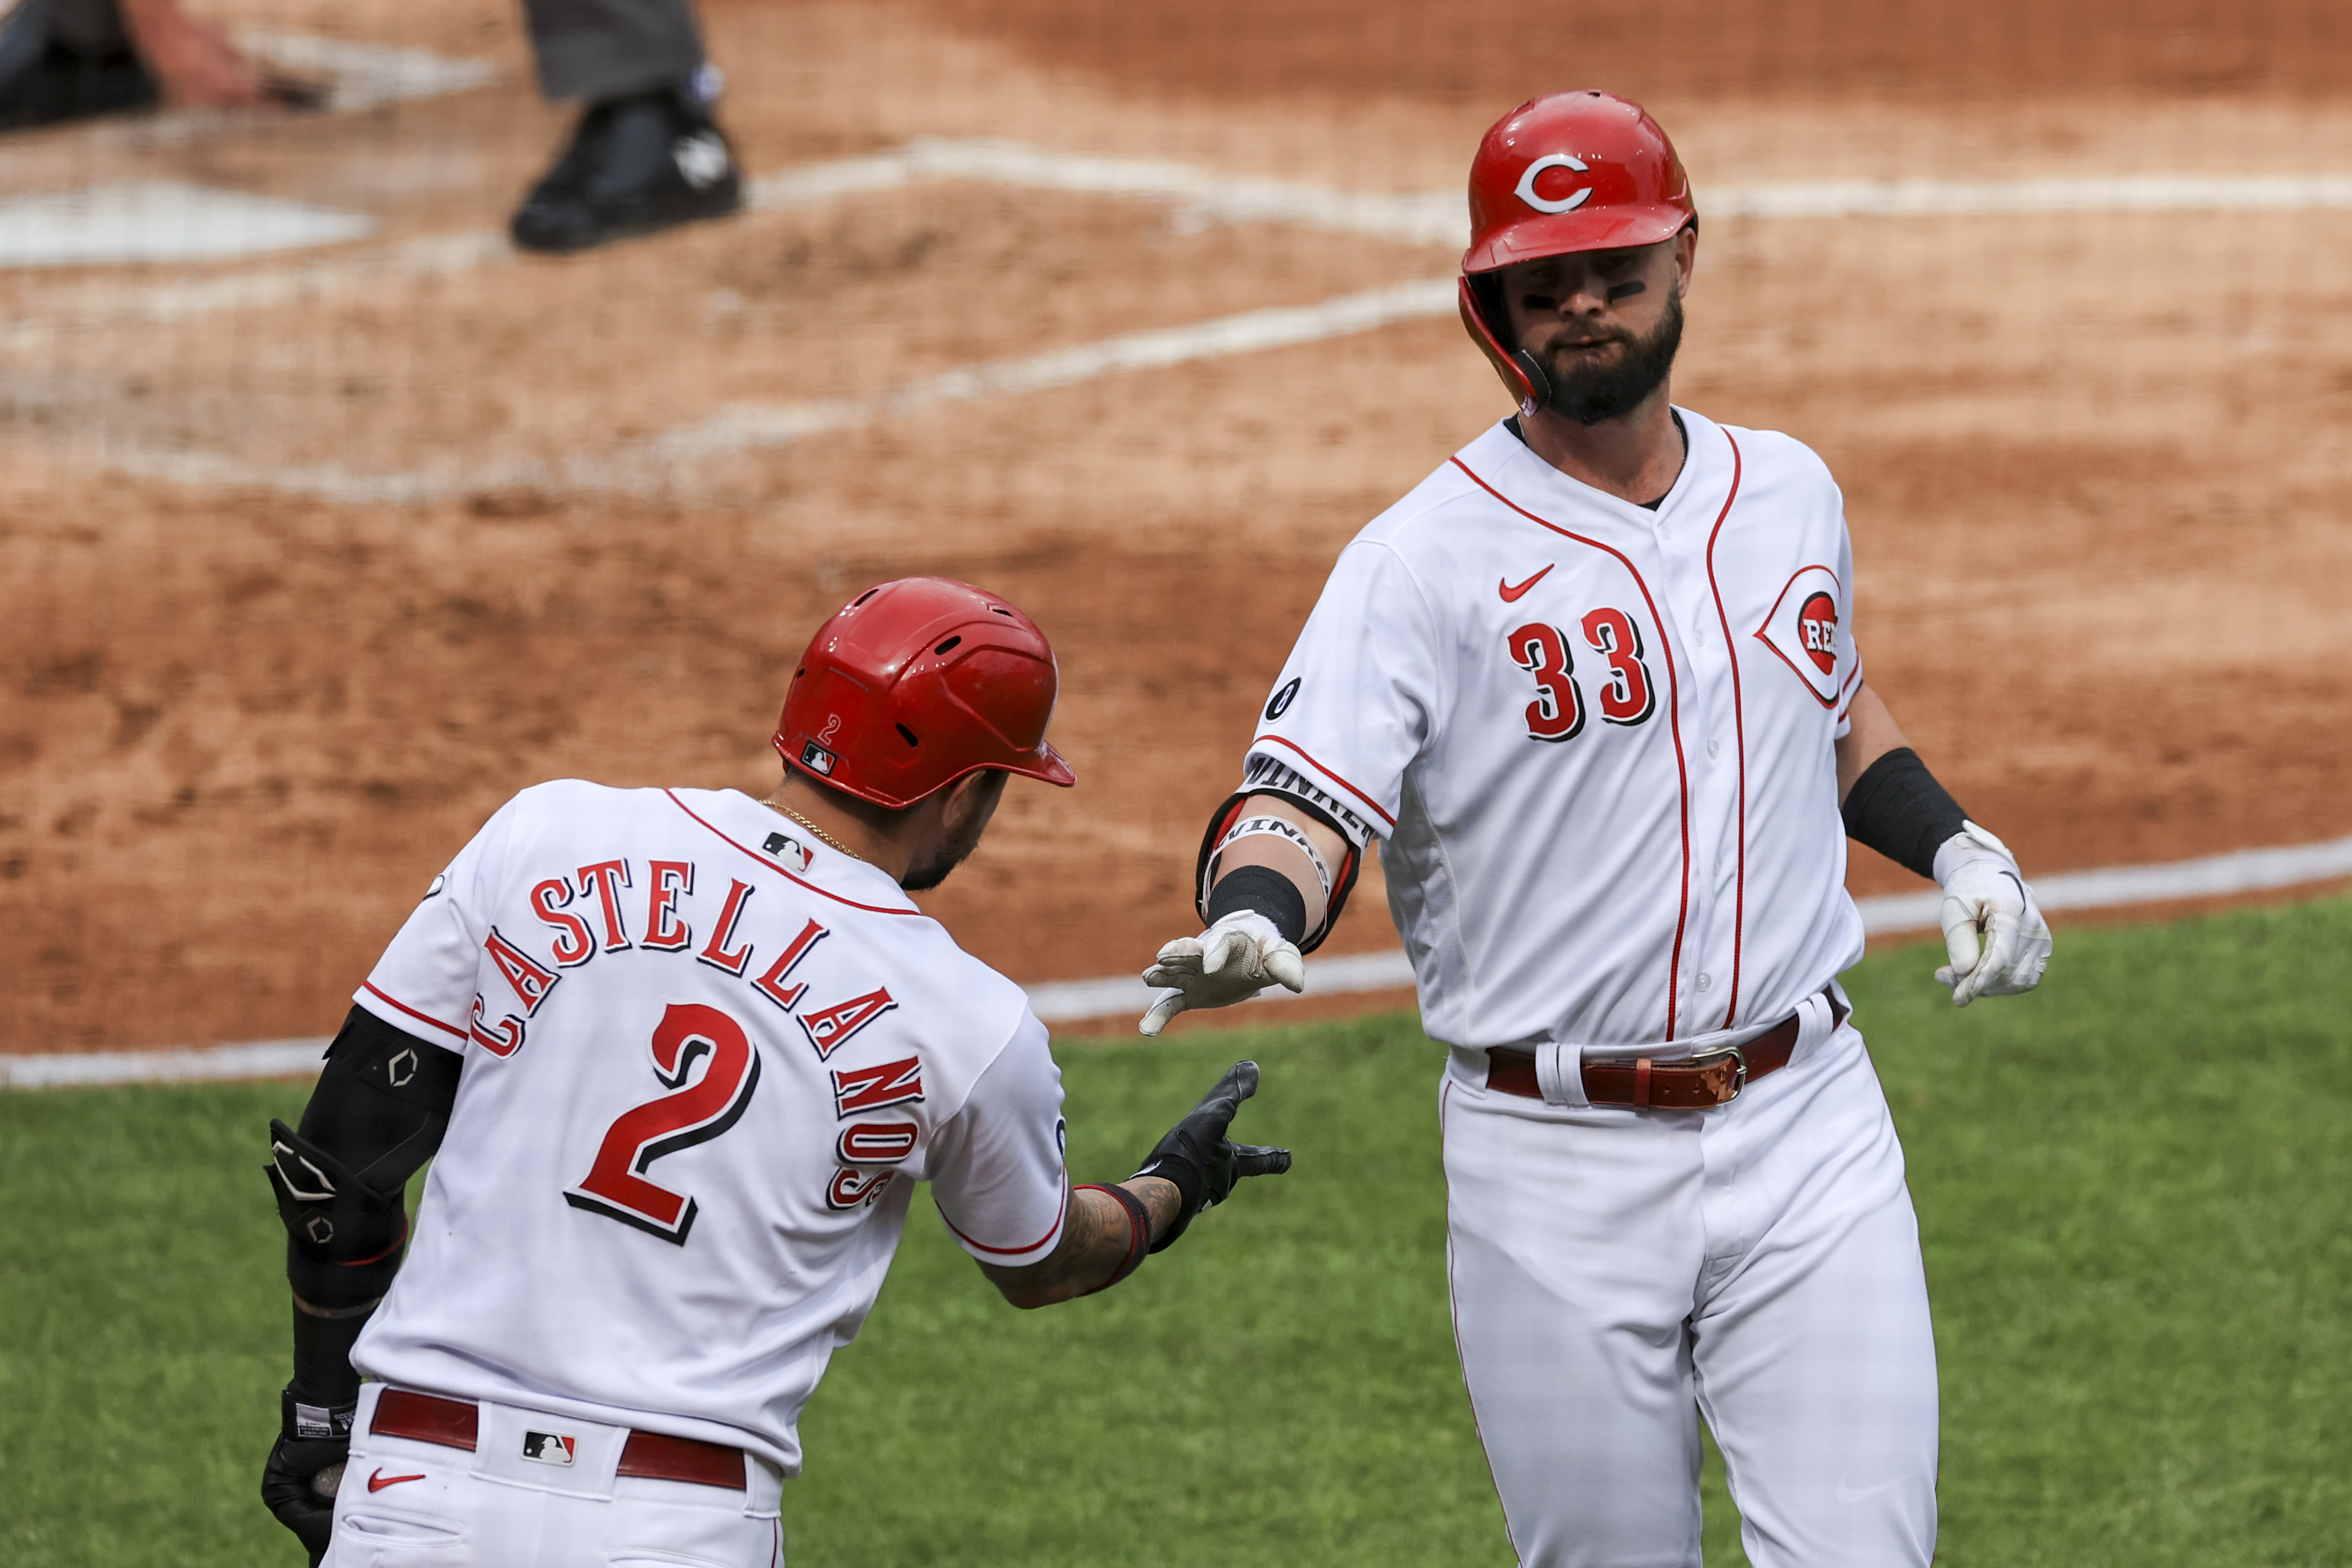 Winker hits 3 solo home runs as Reds beat Brewers - The San Diego